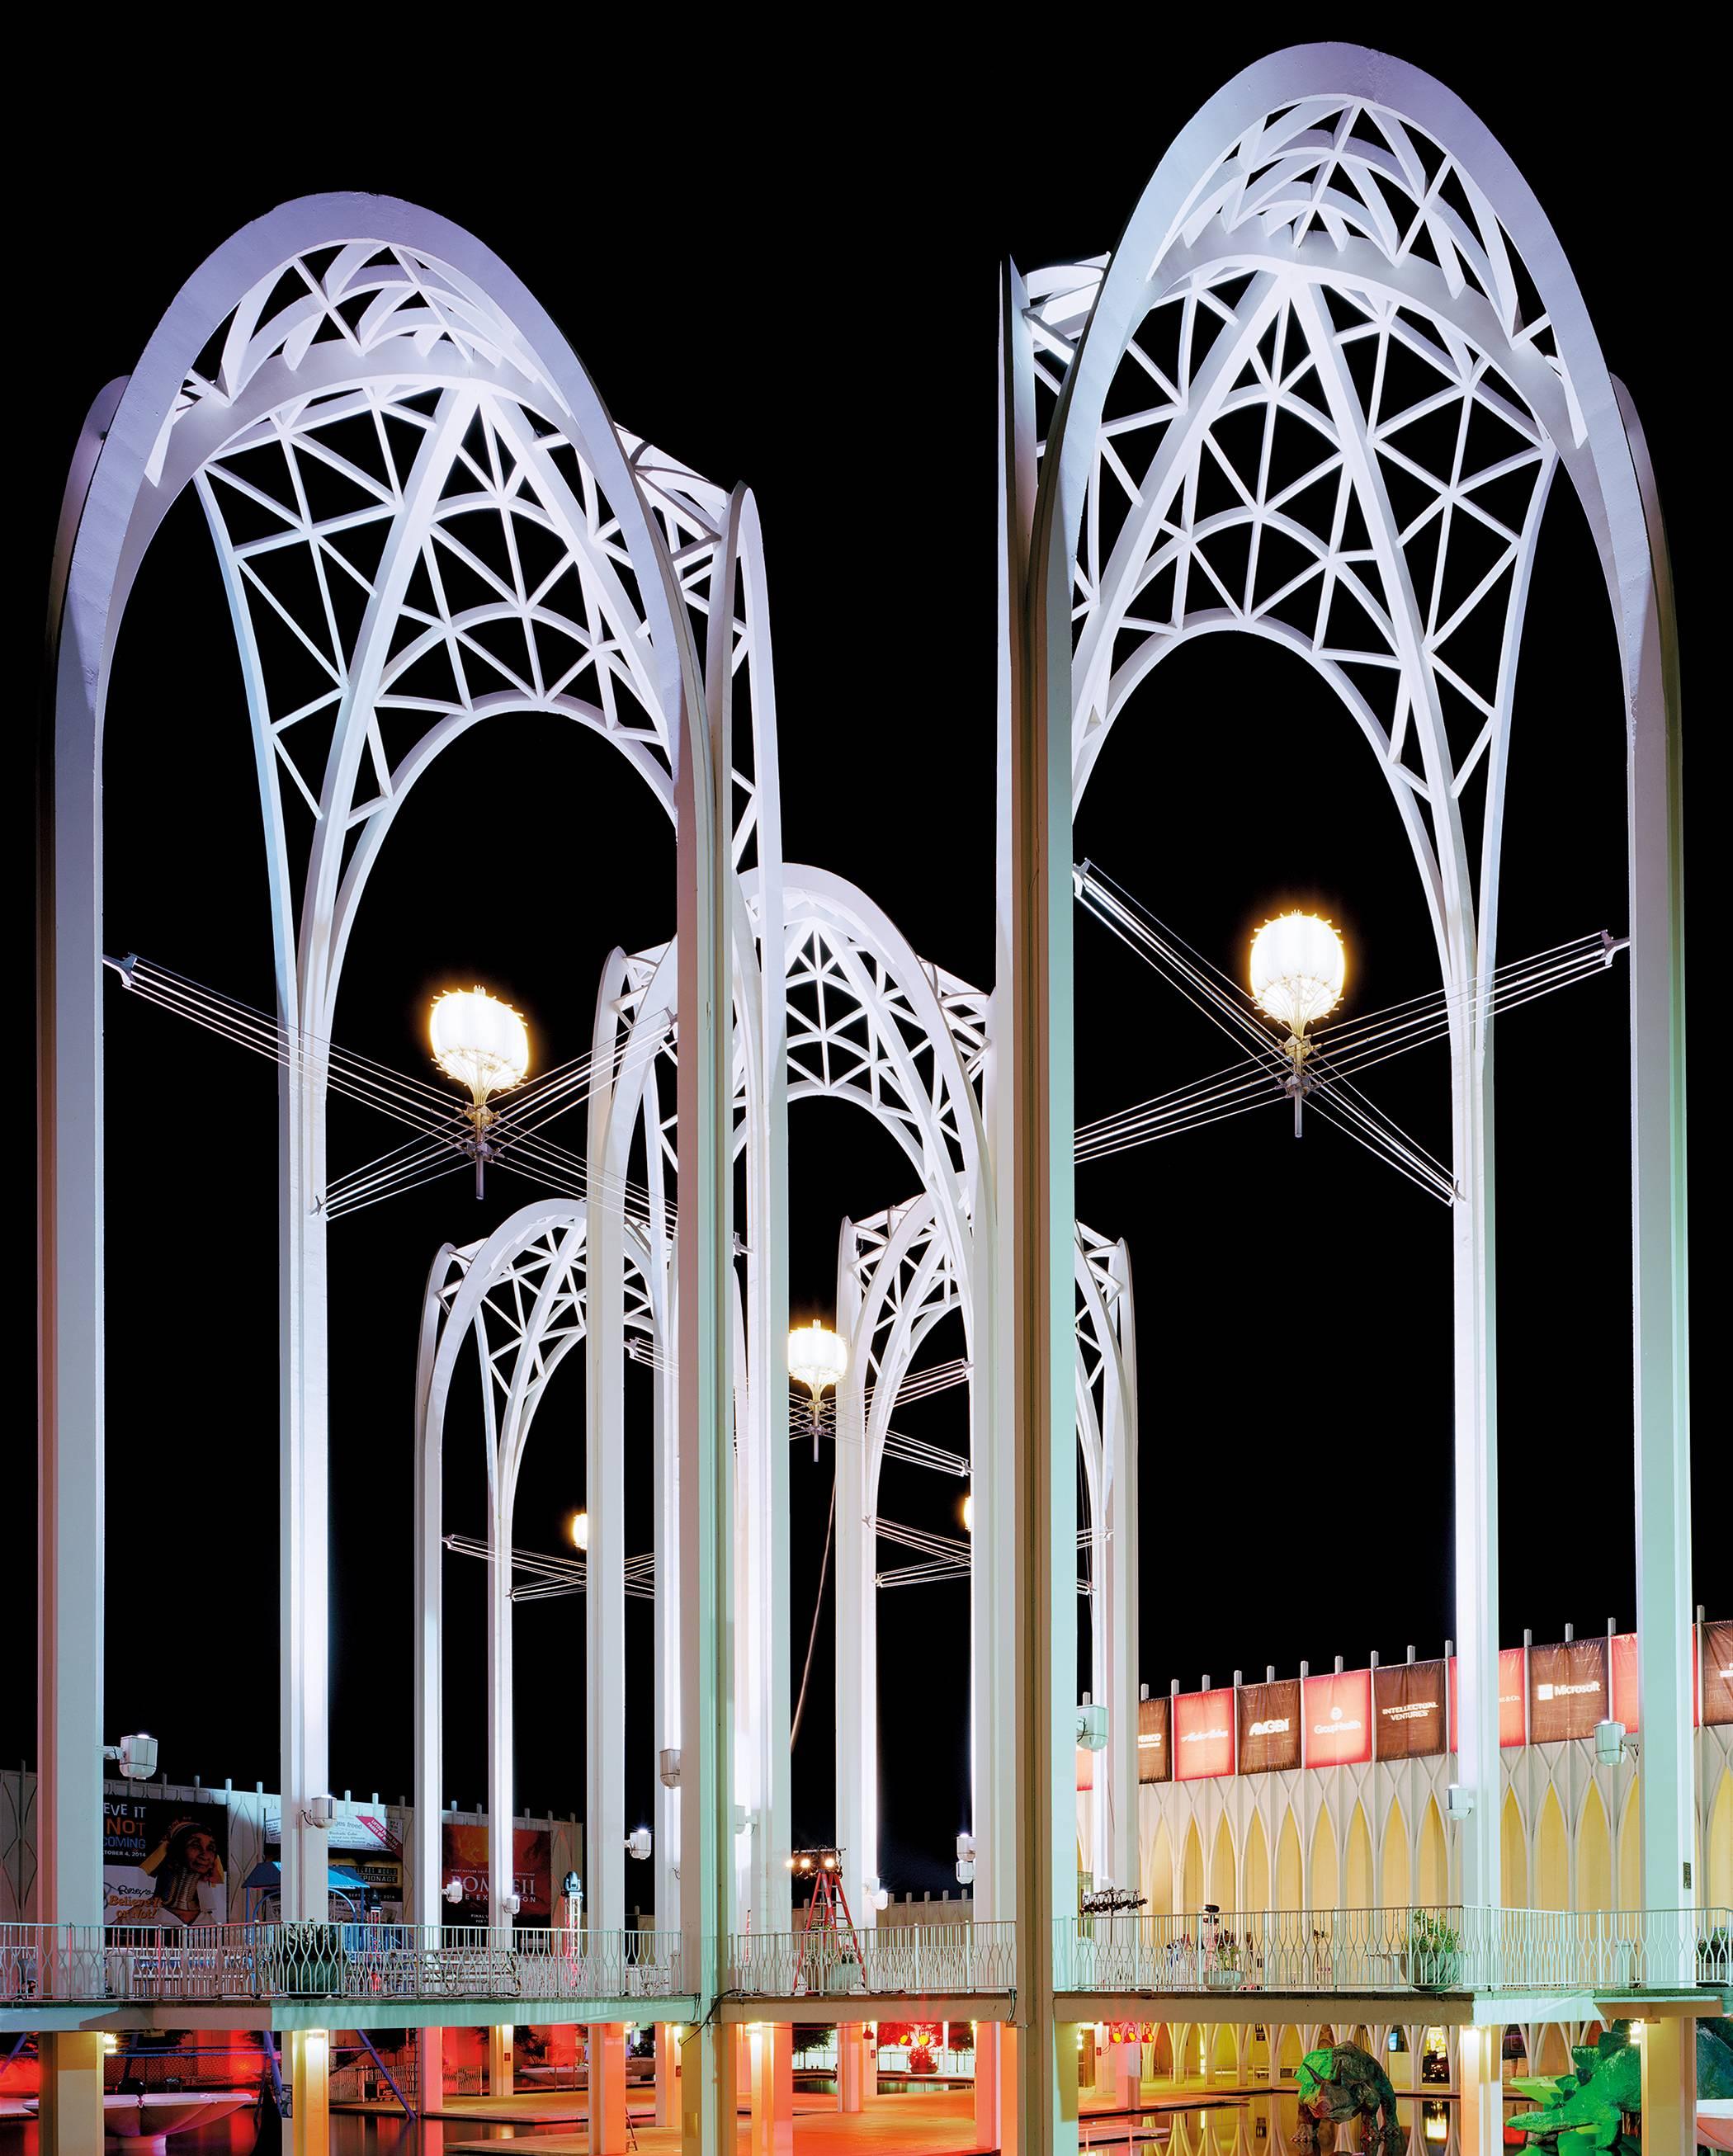 Jade Doskow Color Photograph - Seattle '62 World's Fair, Science Center Arches at Night (25"x20" photograph)